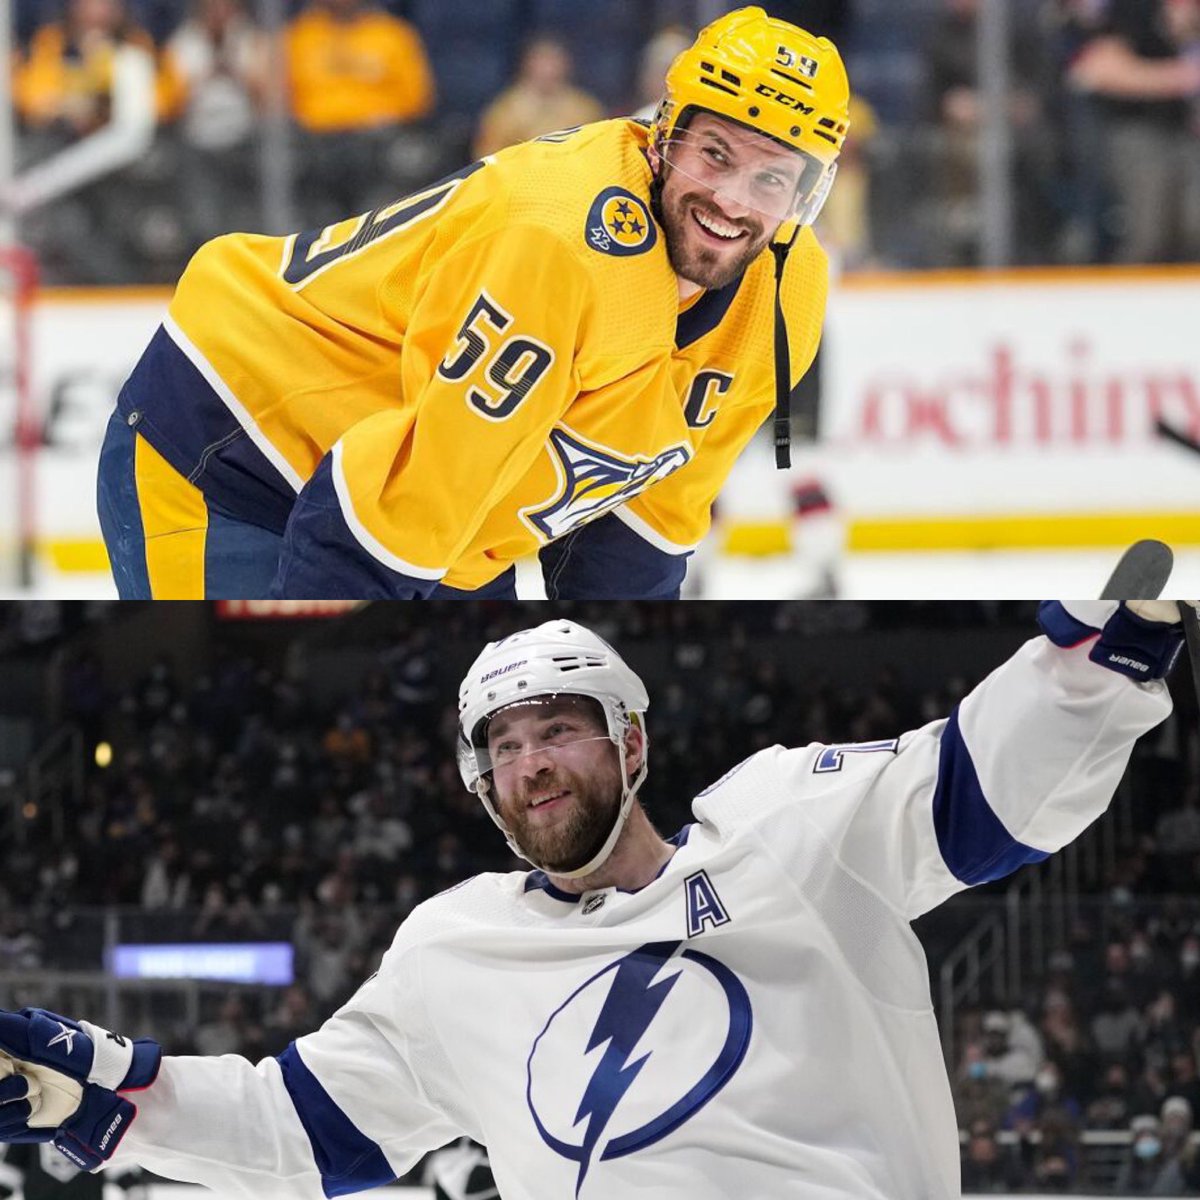 Would you rather have Josi or Hedman?